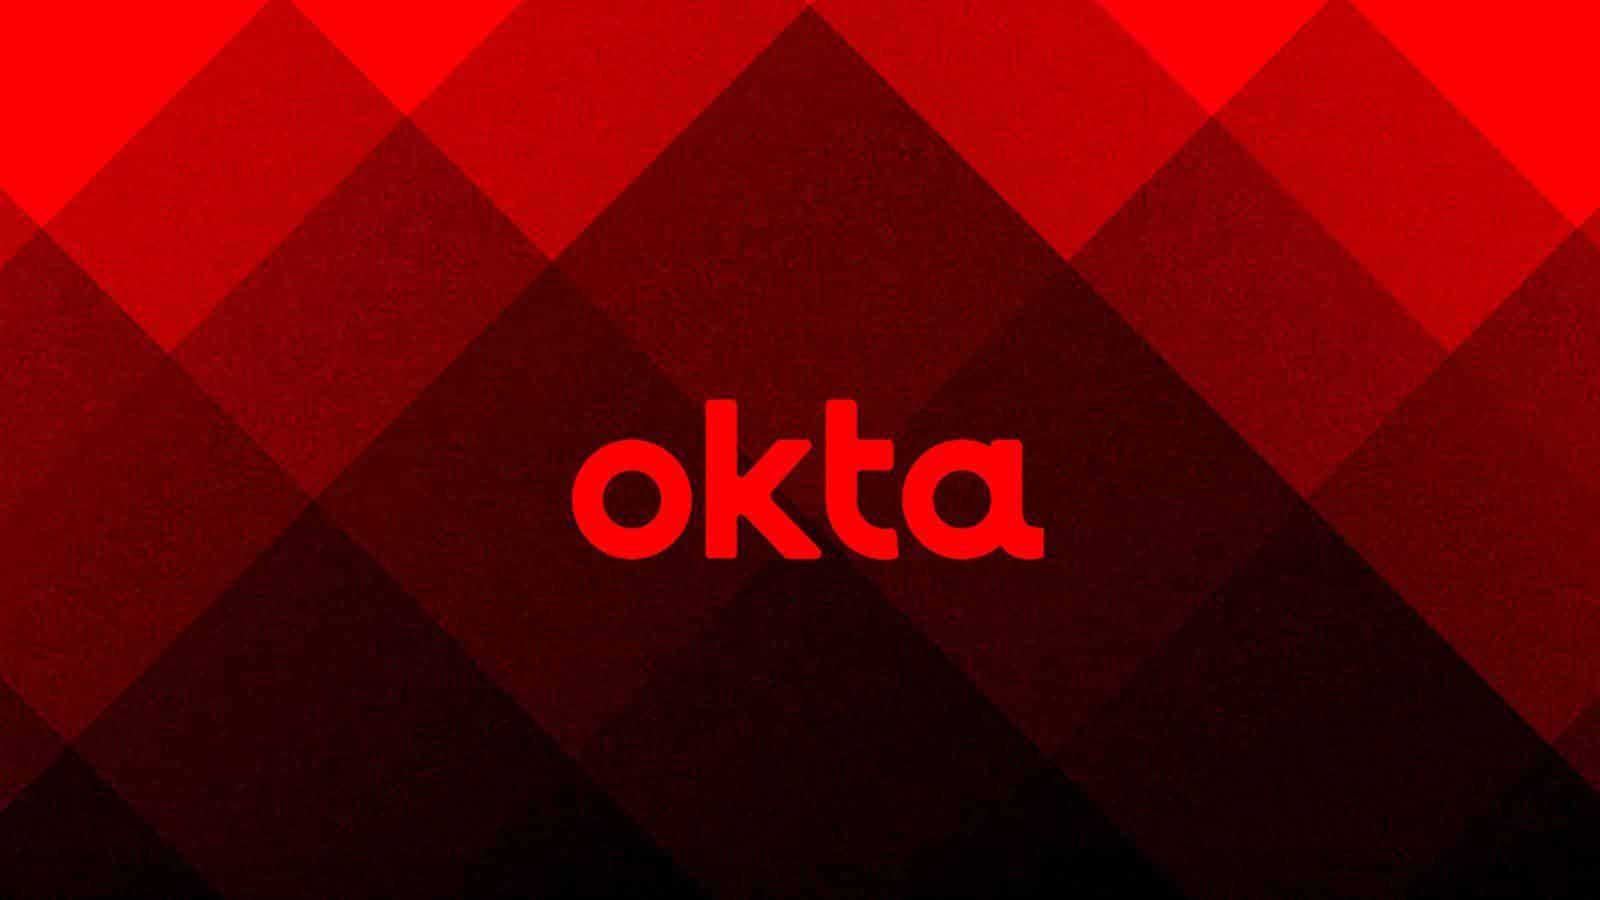 Okta investigating claims of customer data breach from Lapsus$ group